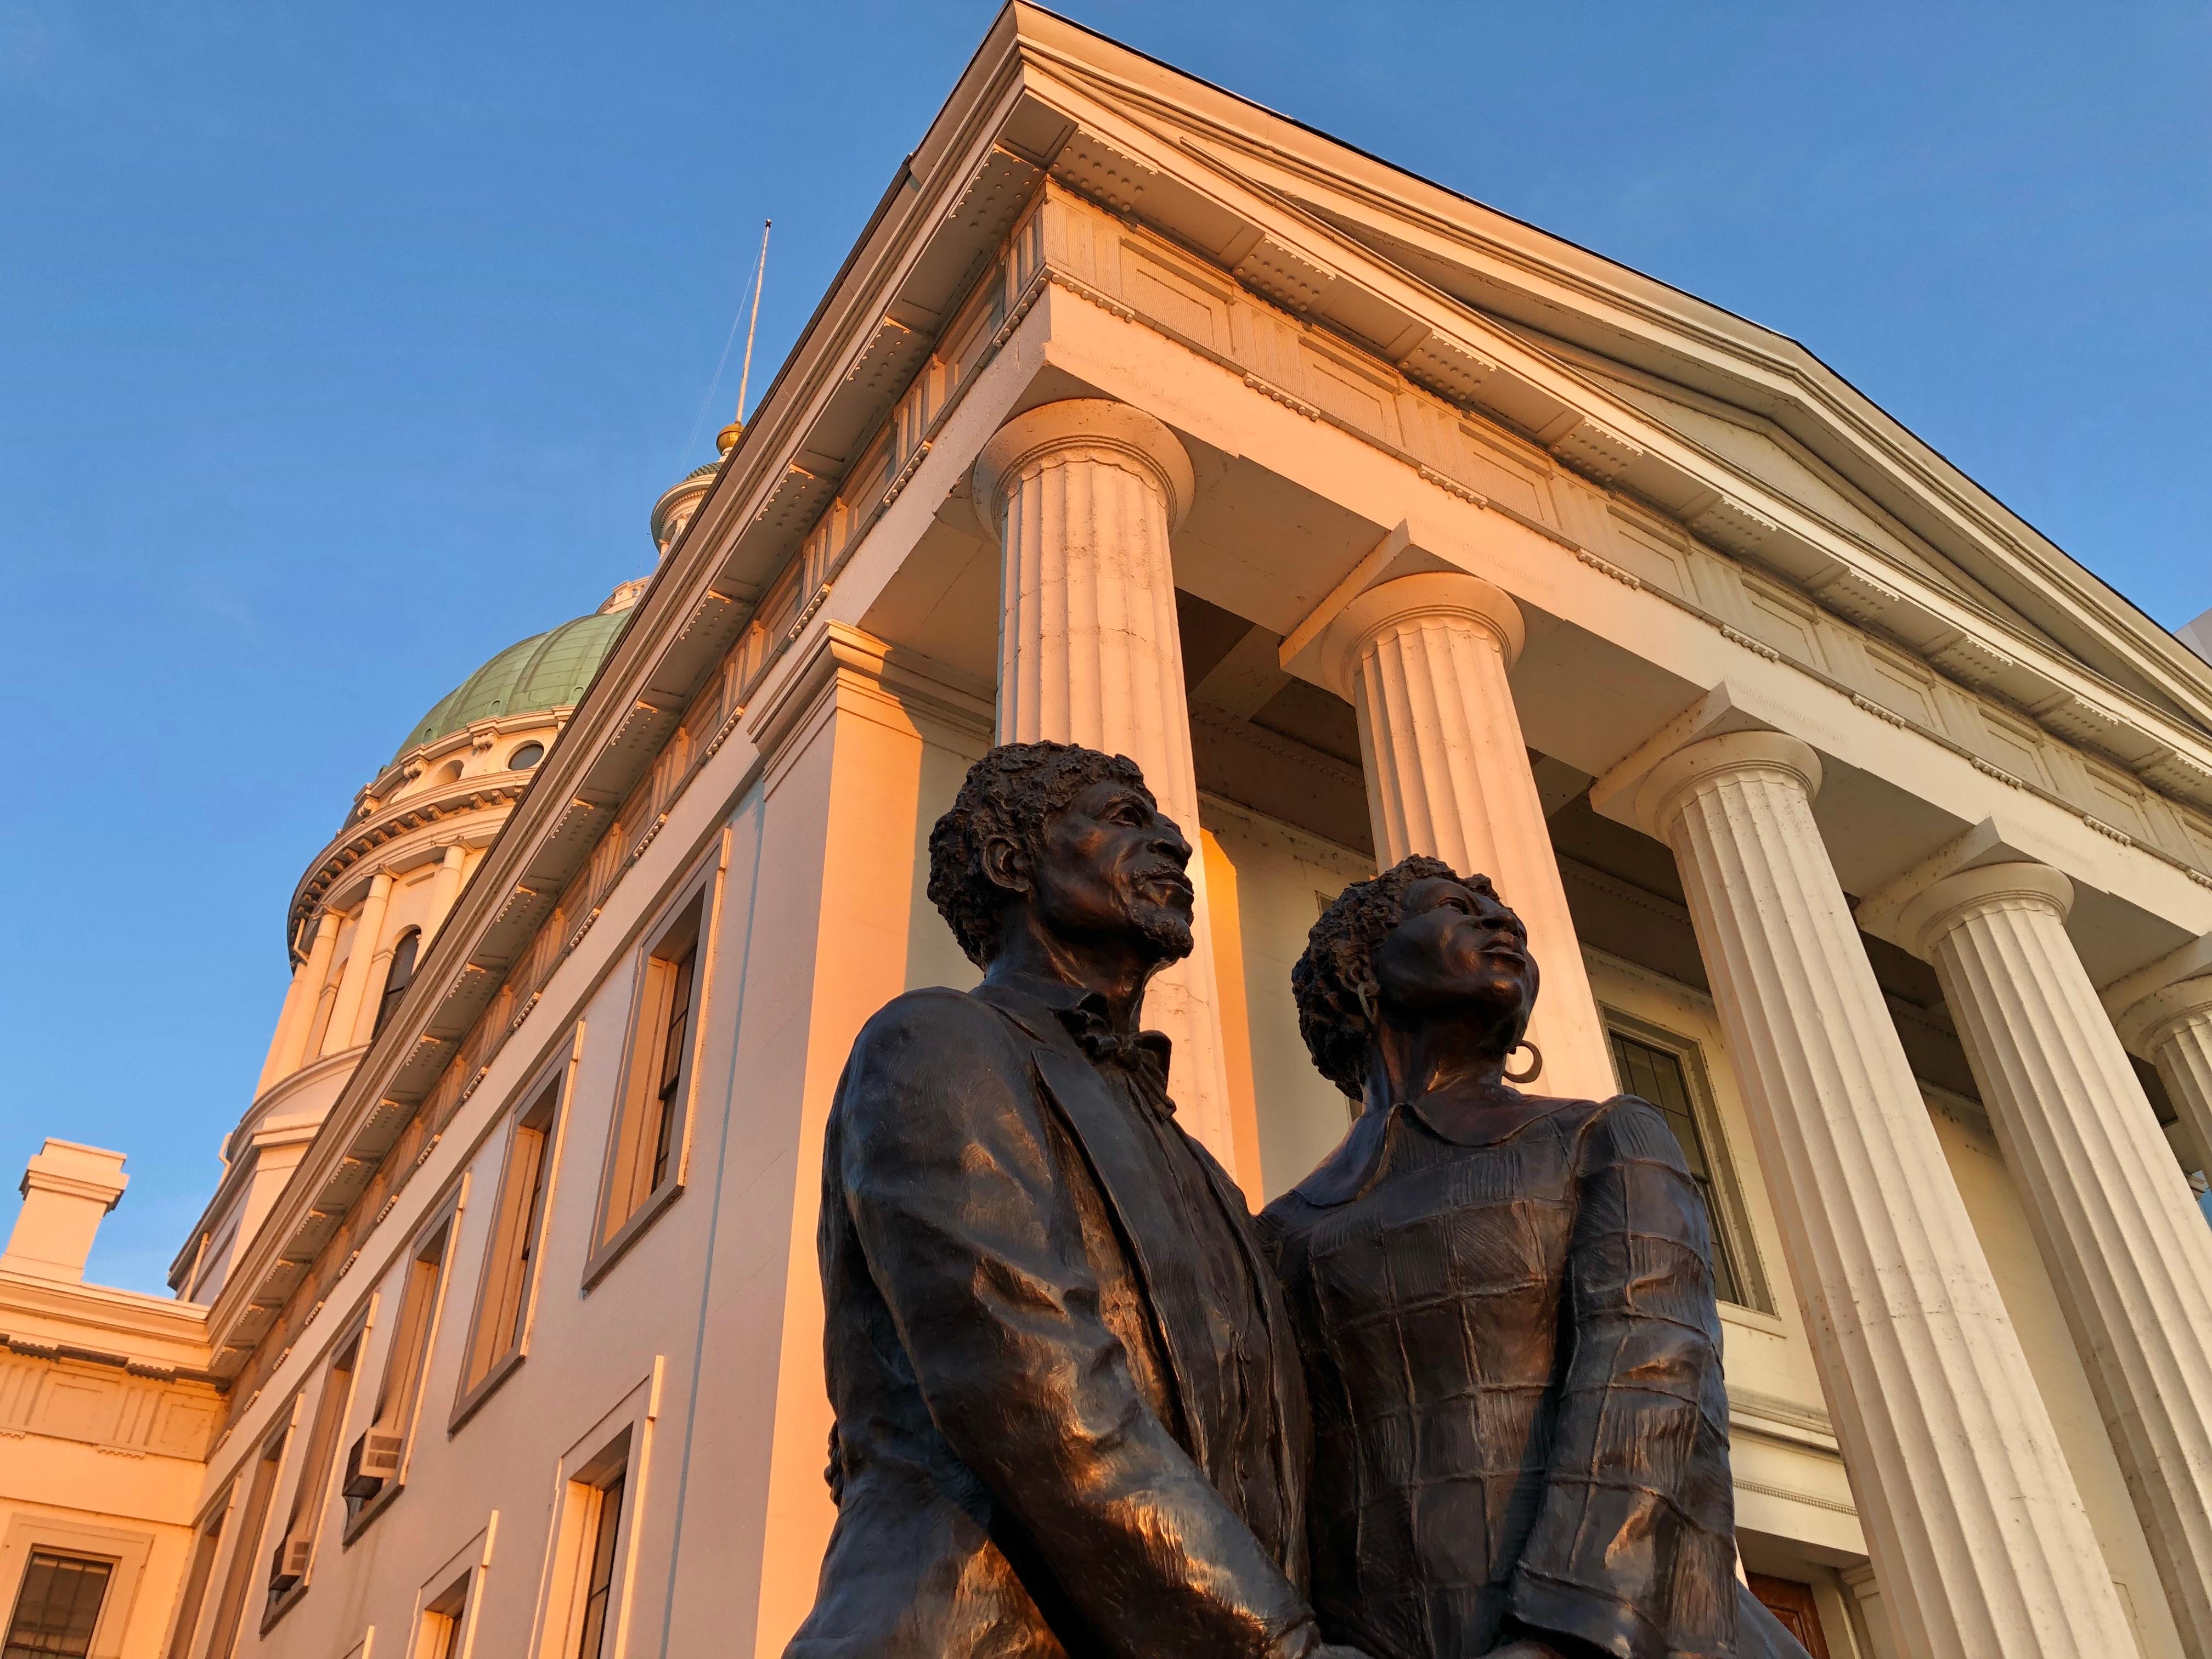 Dred and Harriet Scott statue in front of the columns of the Old Courthouse in the morning light